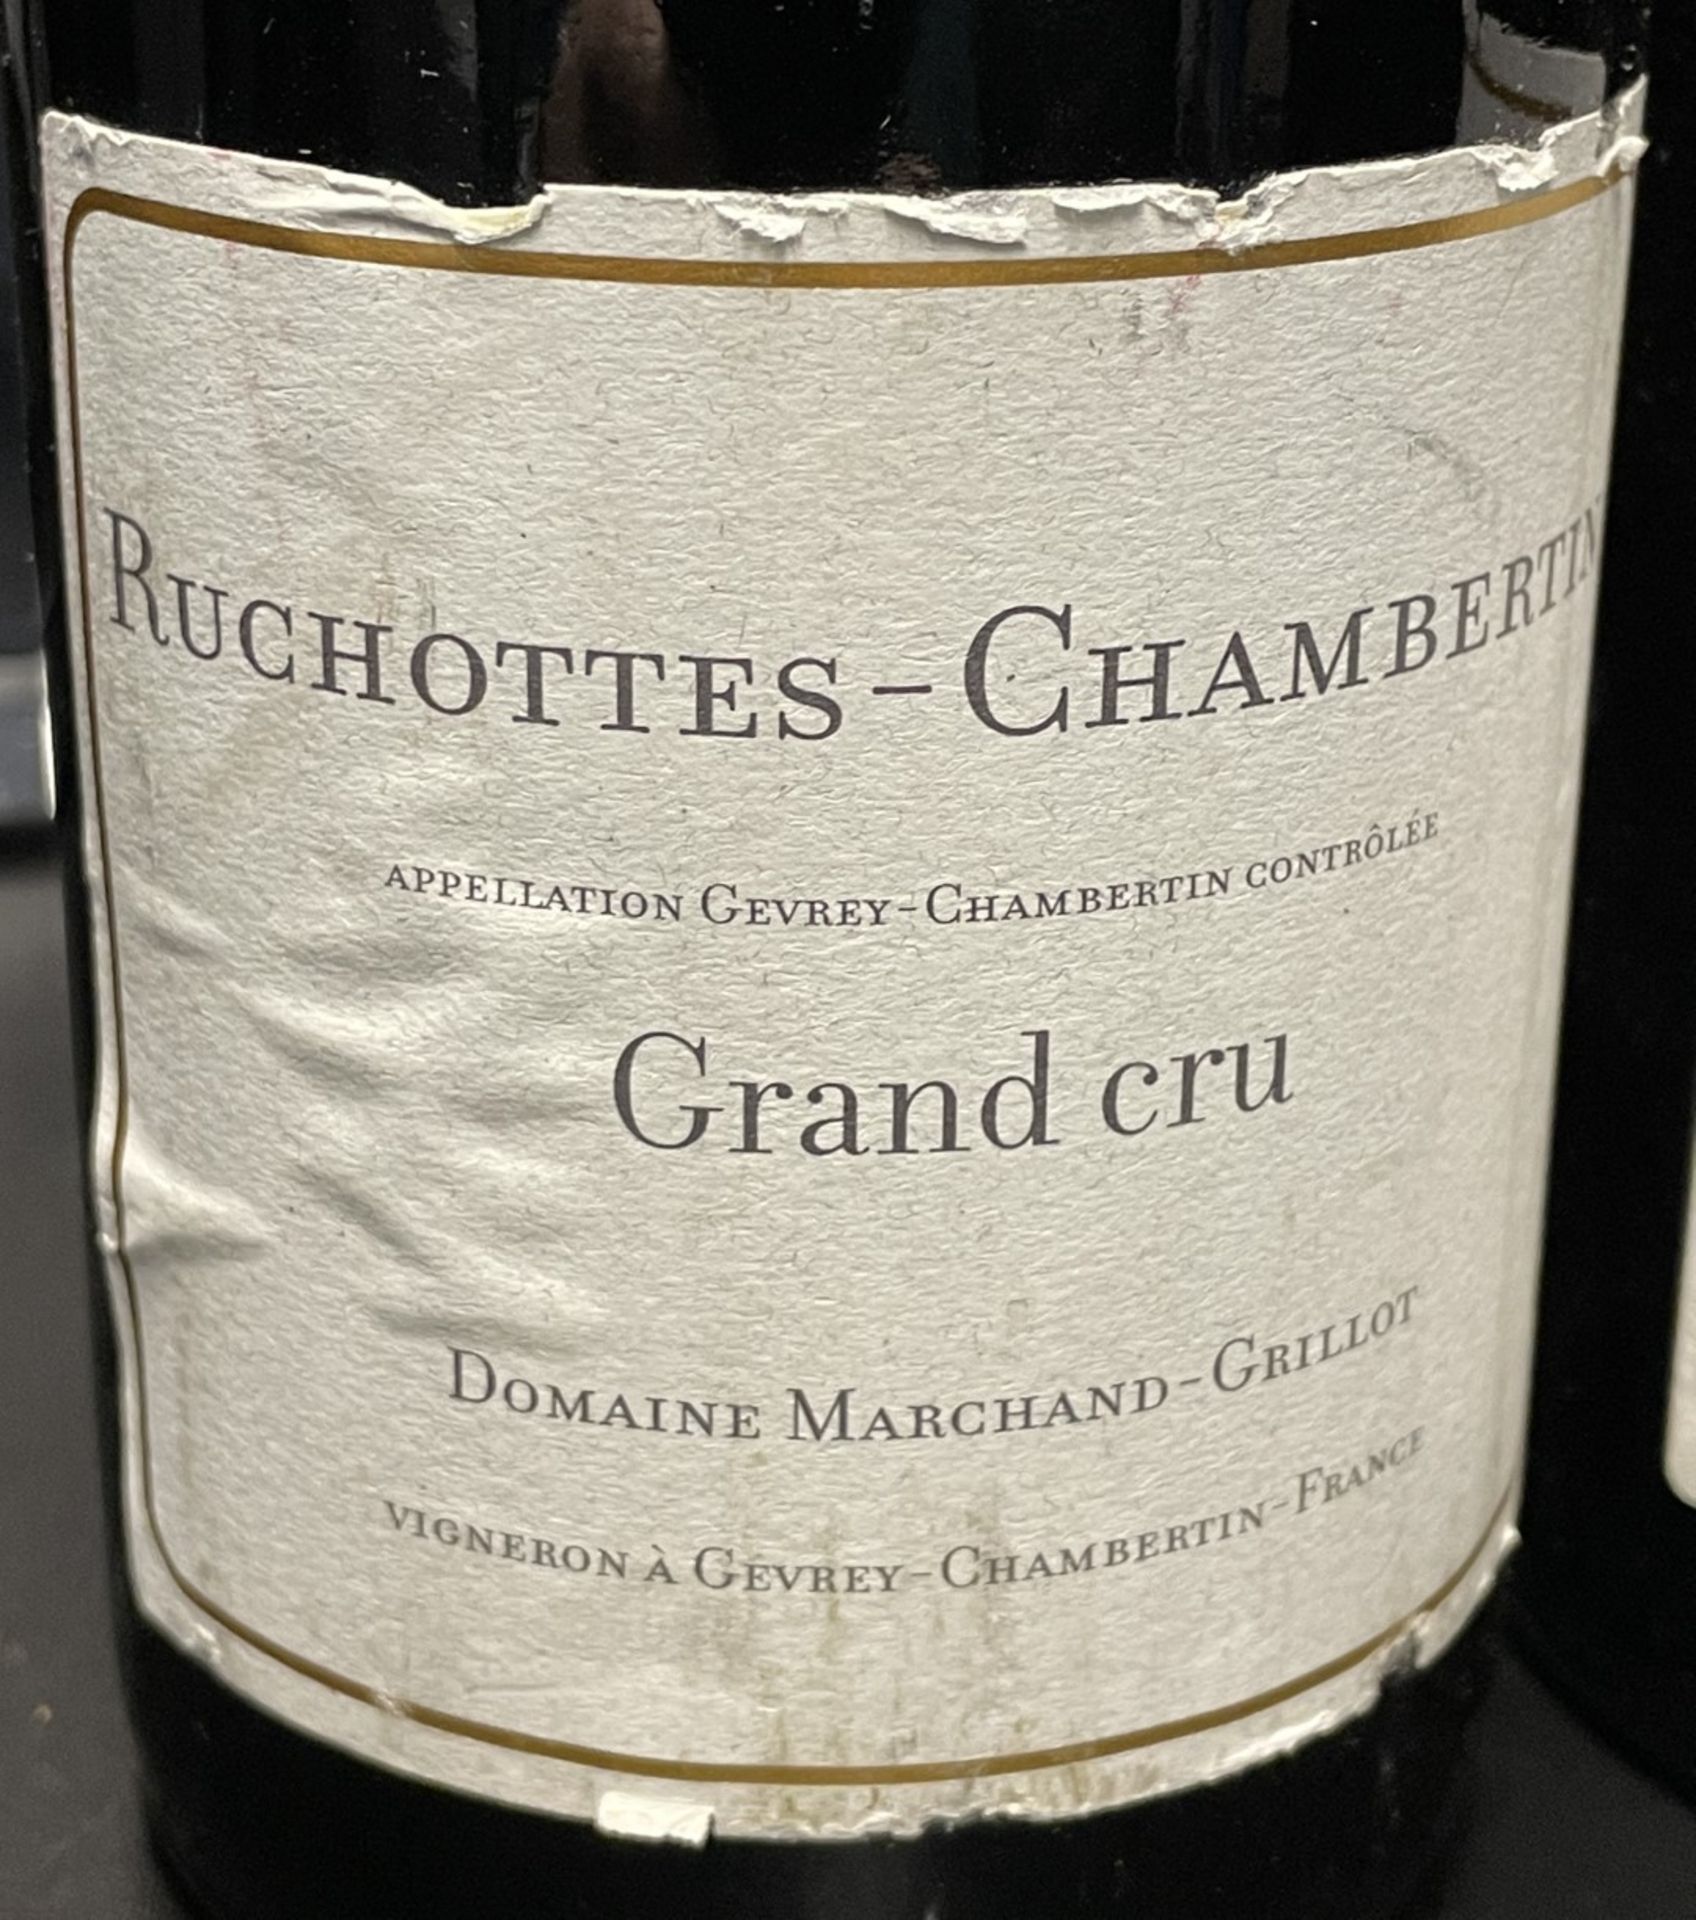 2 x Bottle of 2017 Ruchottes - Chambertin Grand Cru Domaine Marchand - Grillot - Red Wine - RRP £750 - Image 5 of 8